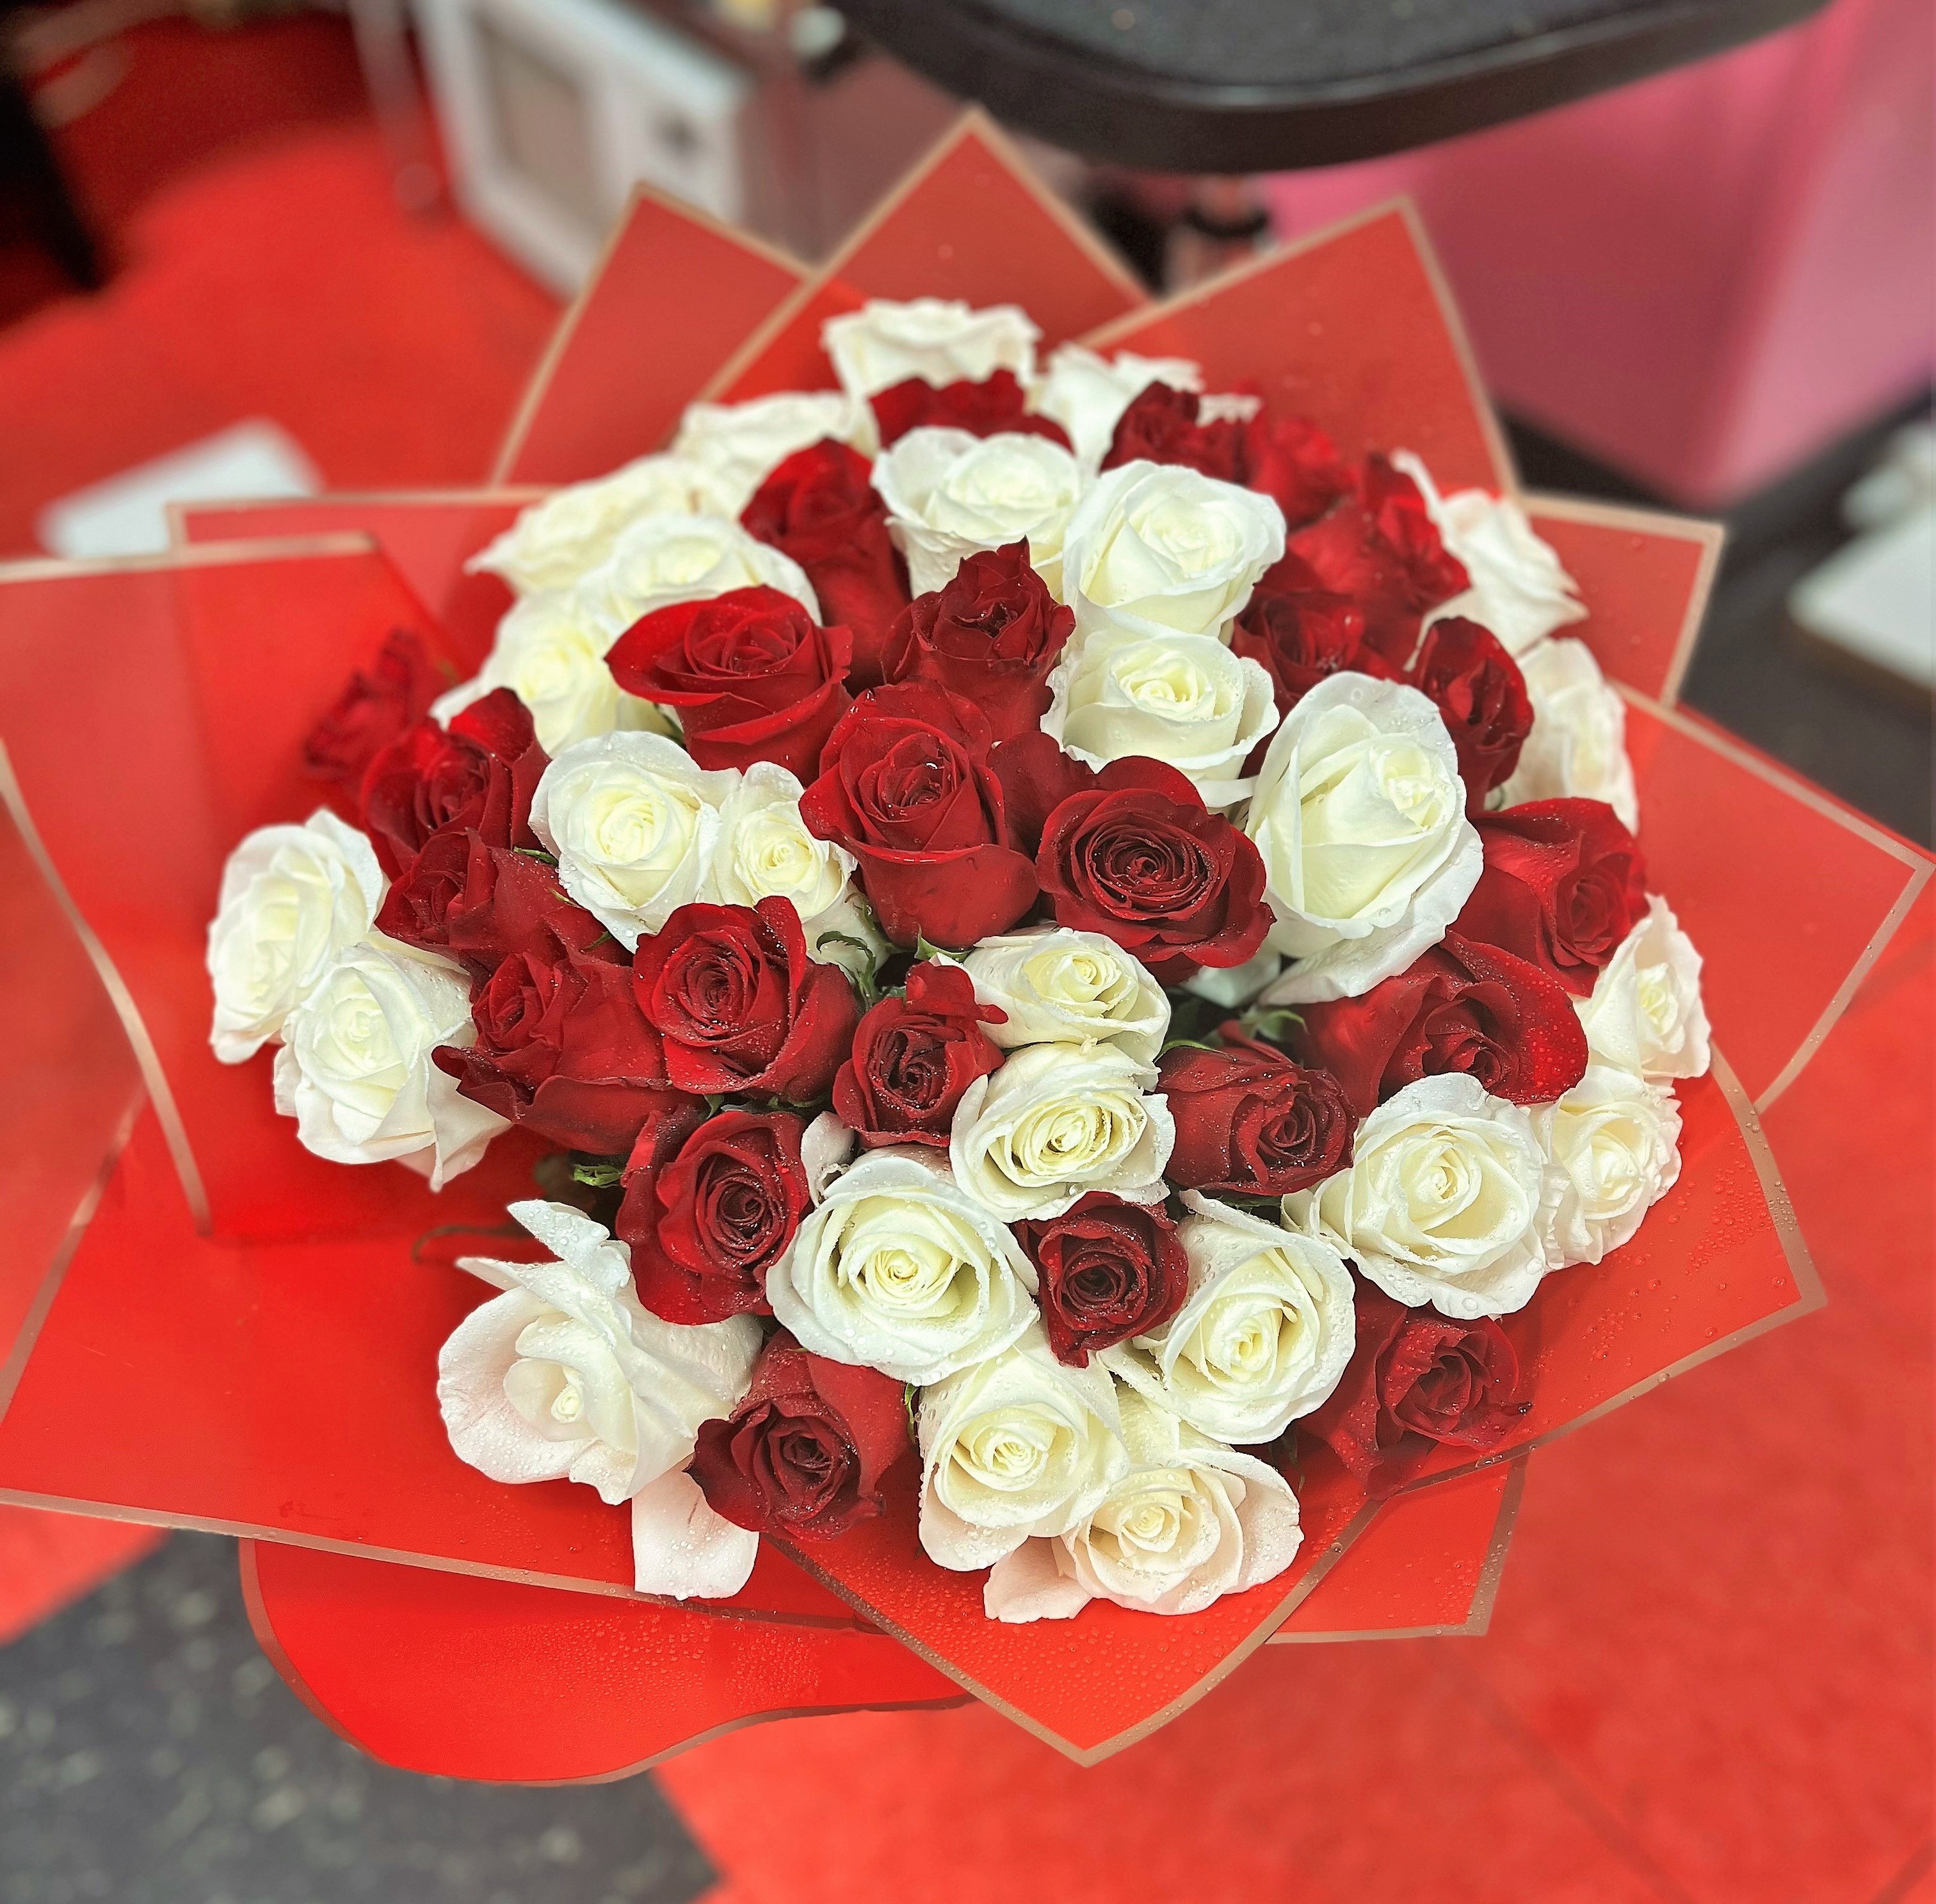 NEW floral paper for Ramos buchones, strawberry bouquet, gift